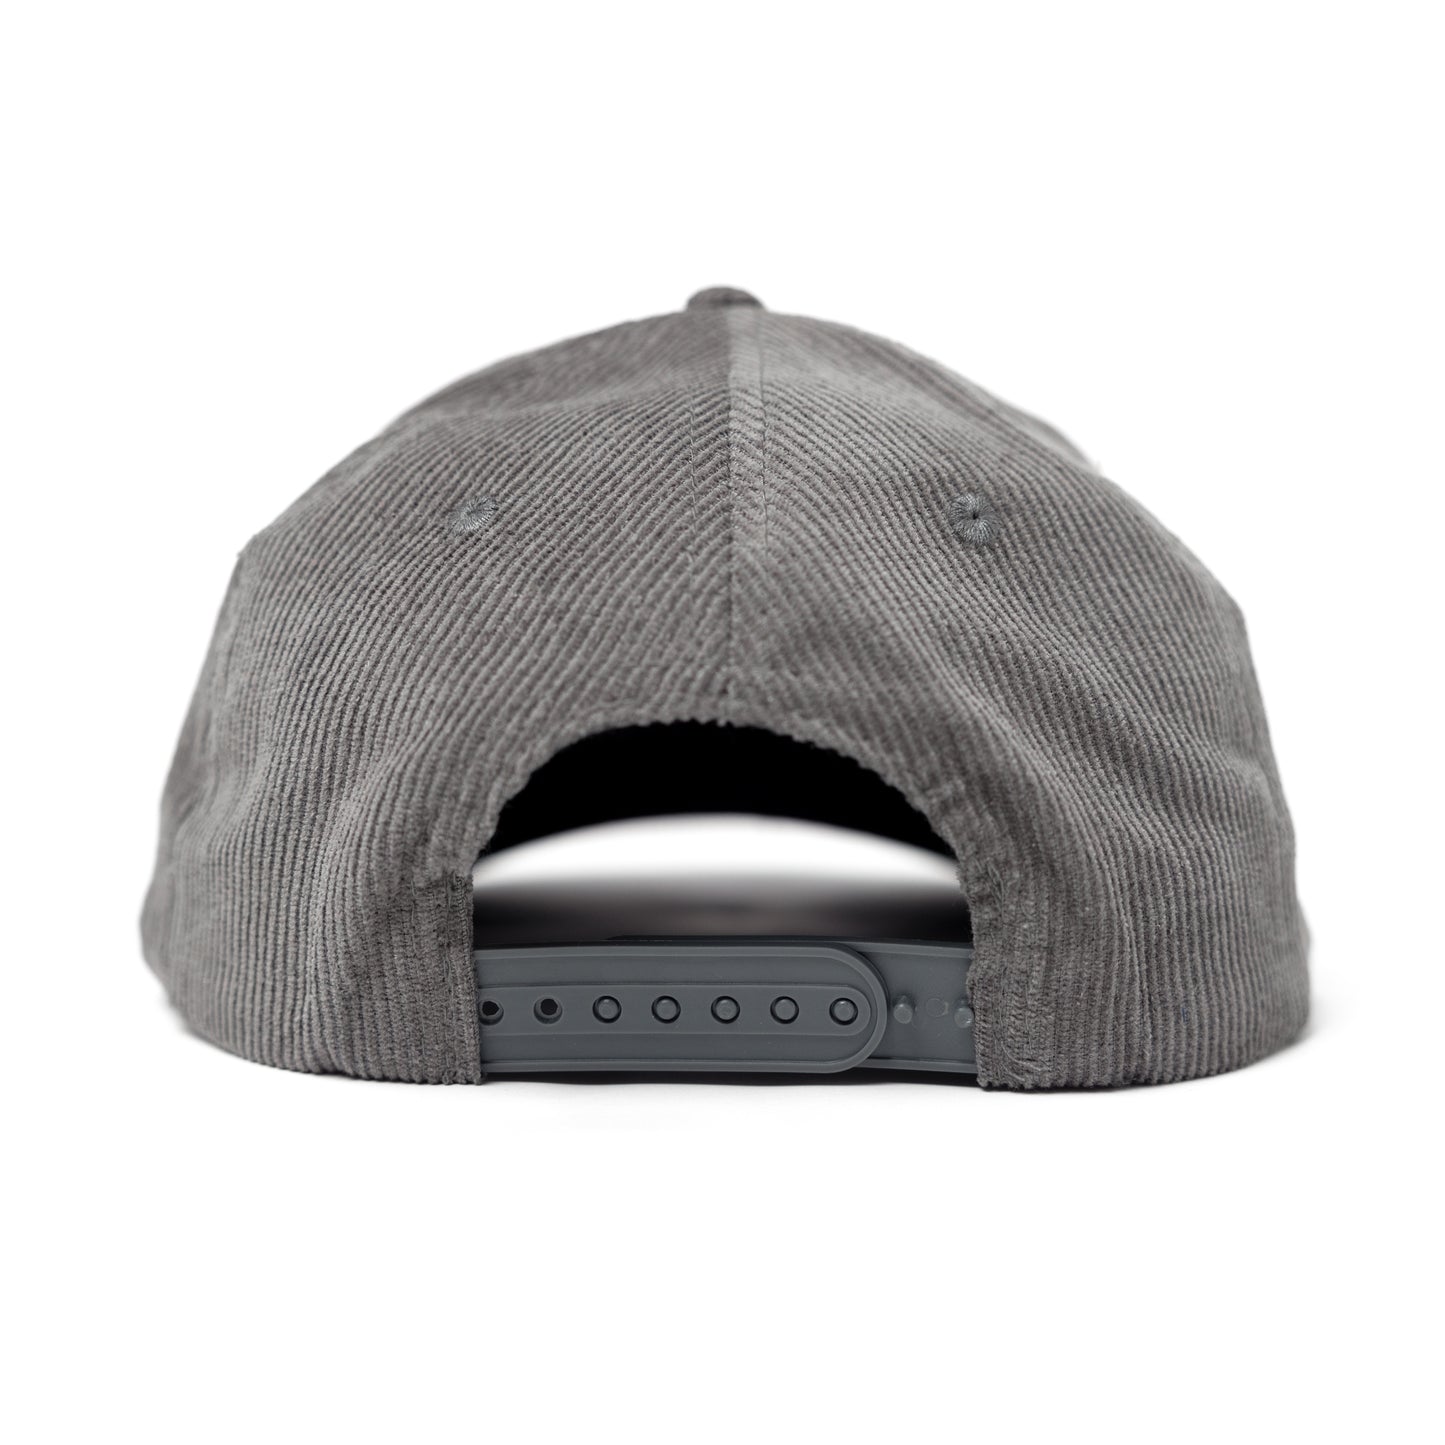 Traveling is a sport Hat (Grey)